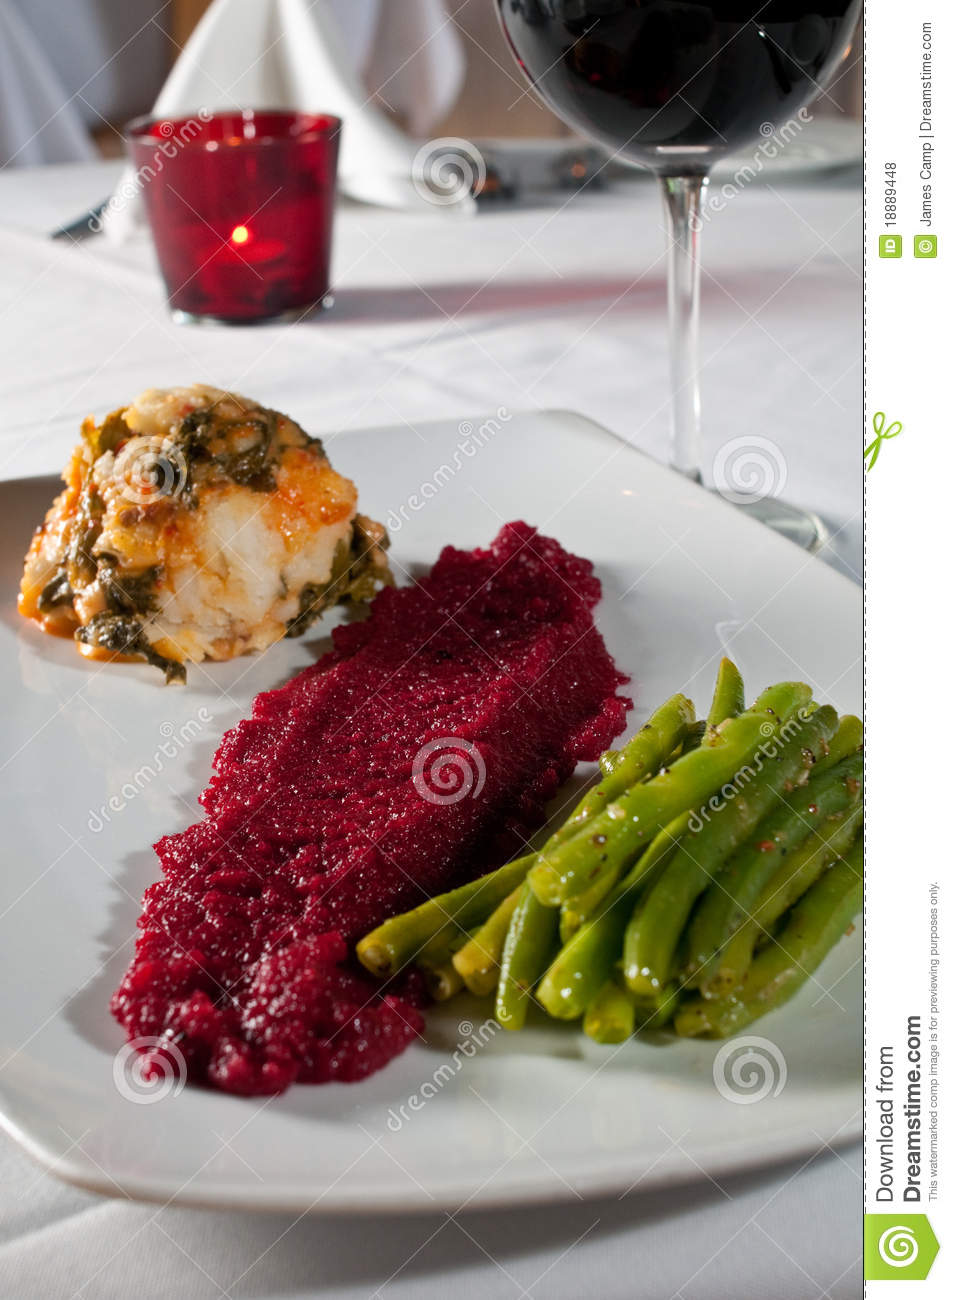 Vegetable Plate With Vanilla Beets Pimento Cheese Mustard Green